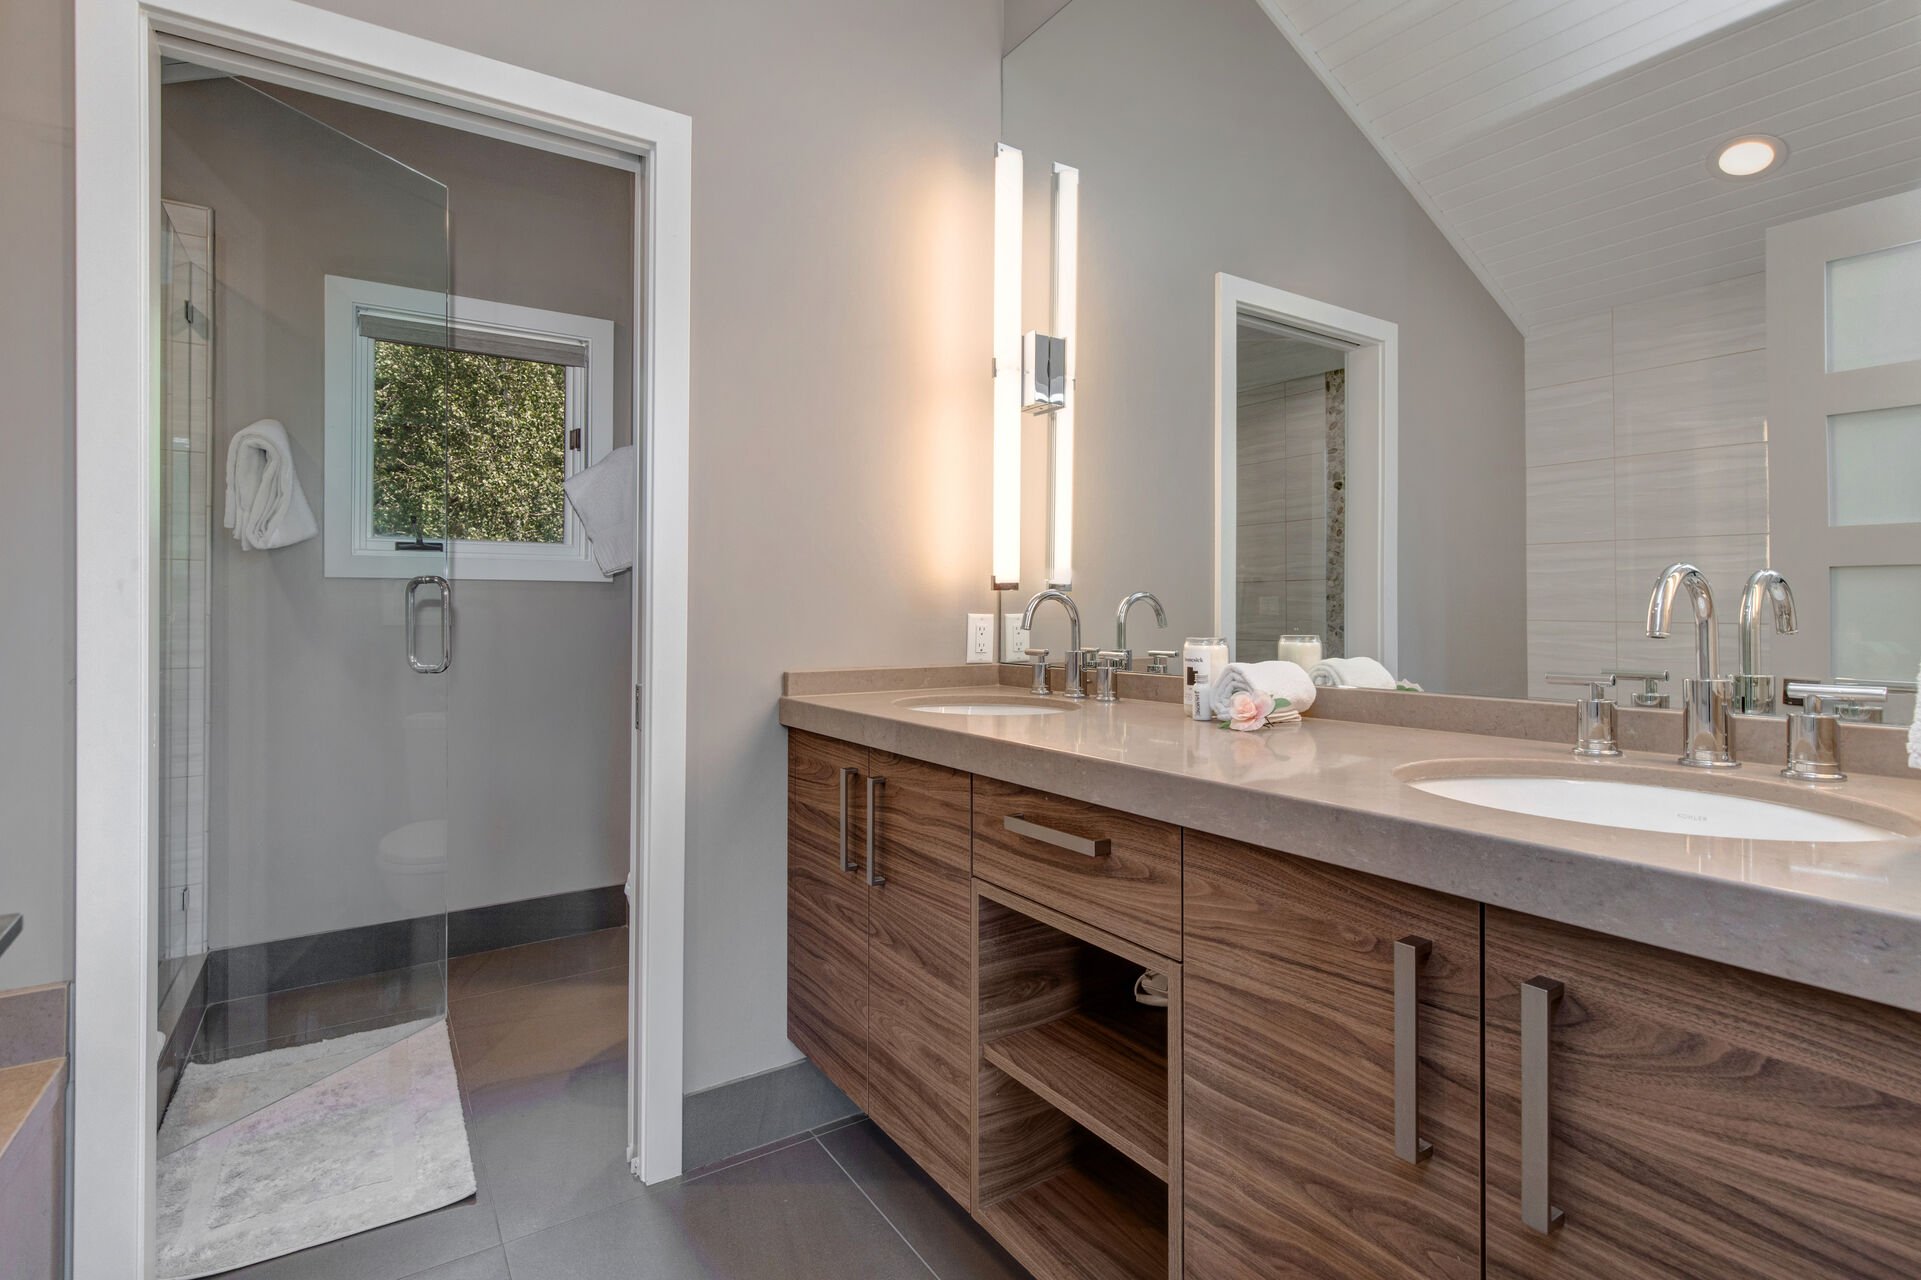 Grand Master Bathroom with Dual Sinks, Water Closet, Tile Shower, and Soaking Tub